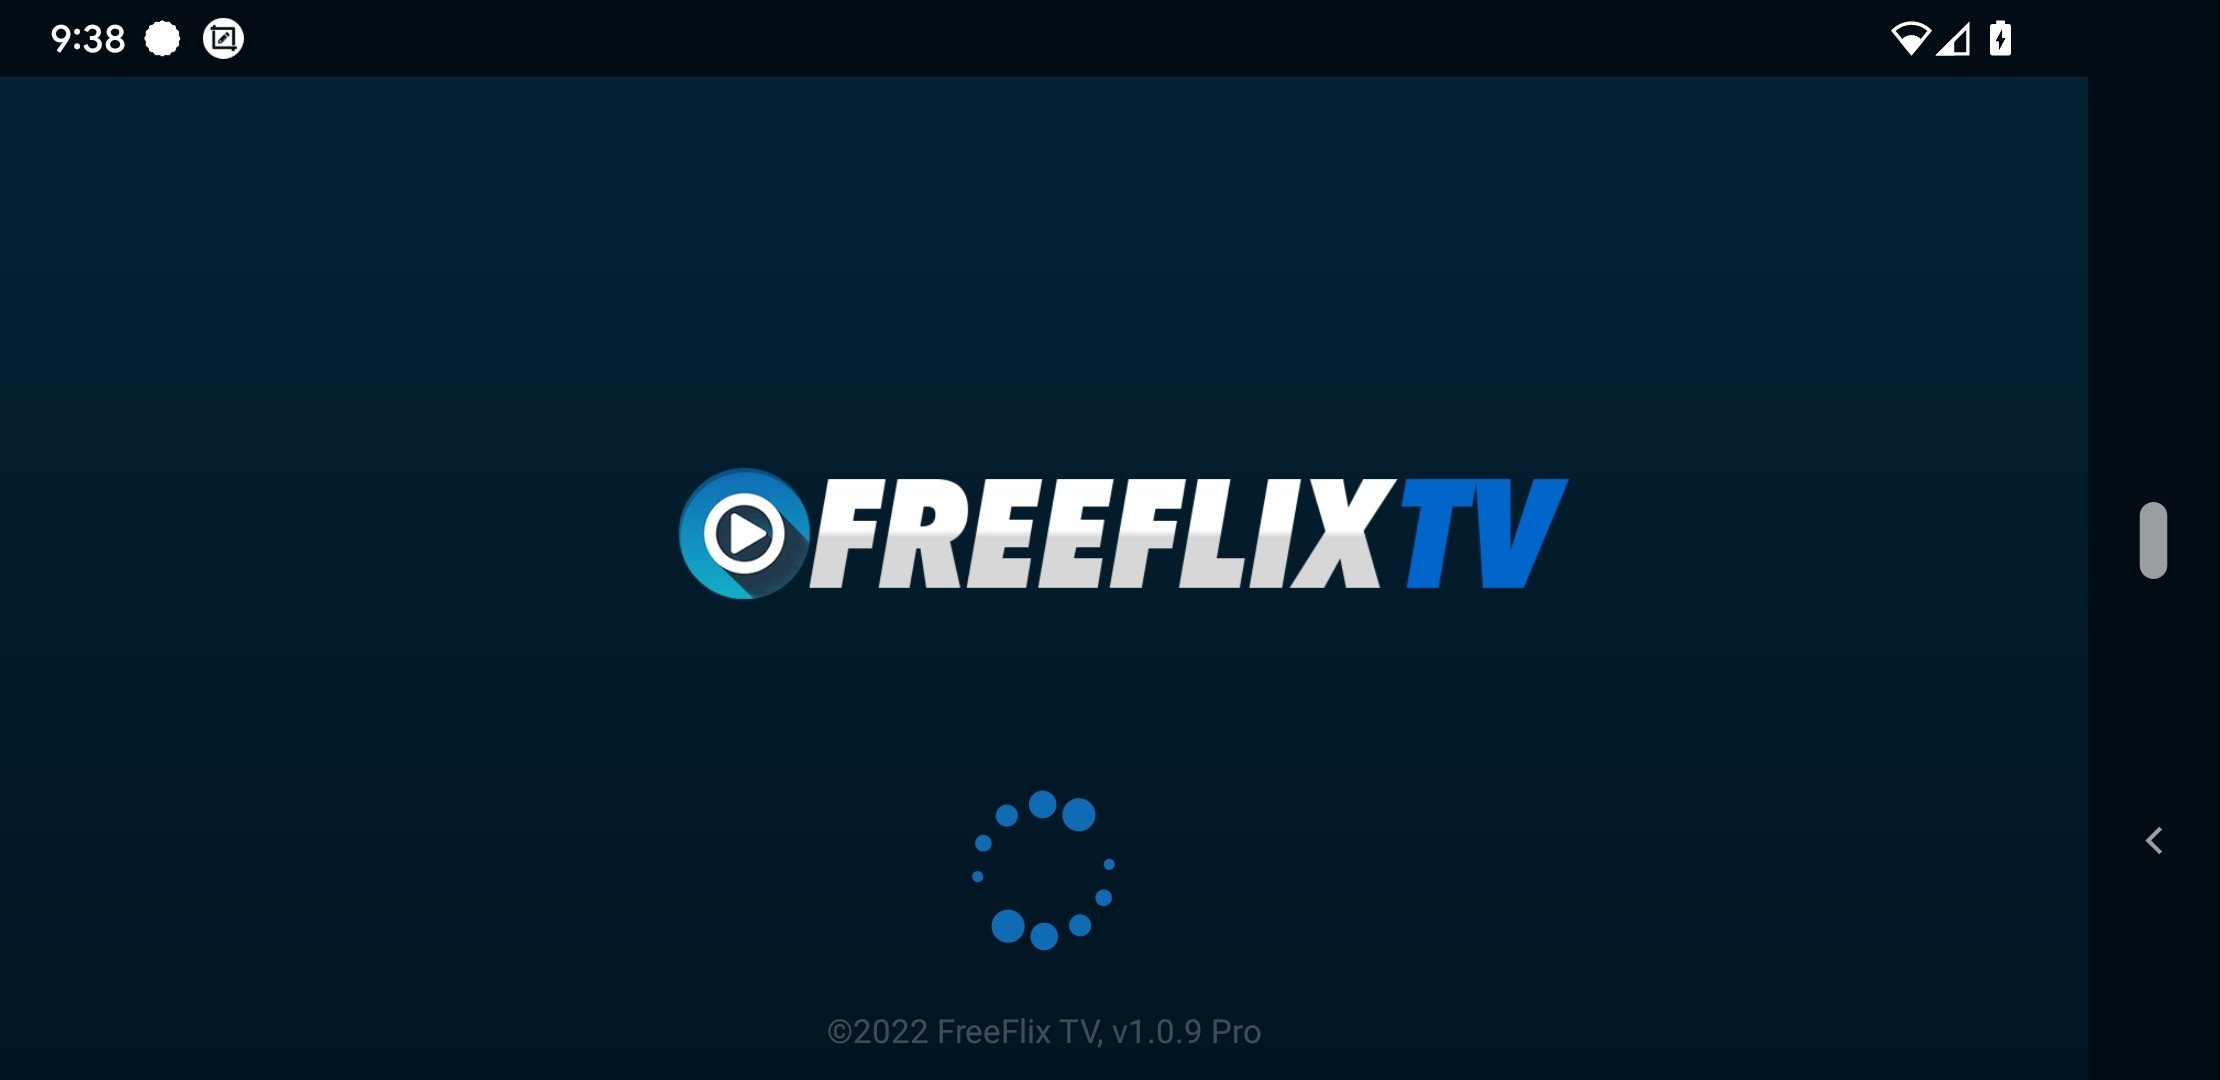 FreeFlix TV 1.0.8 Download for Android APK Free